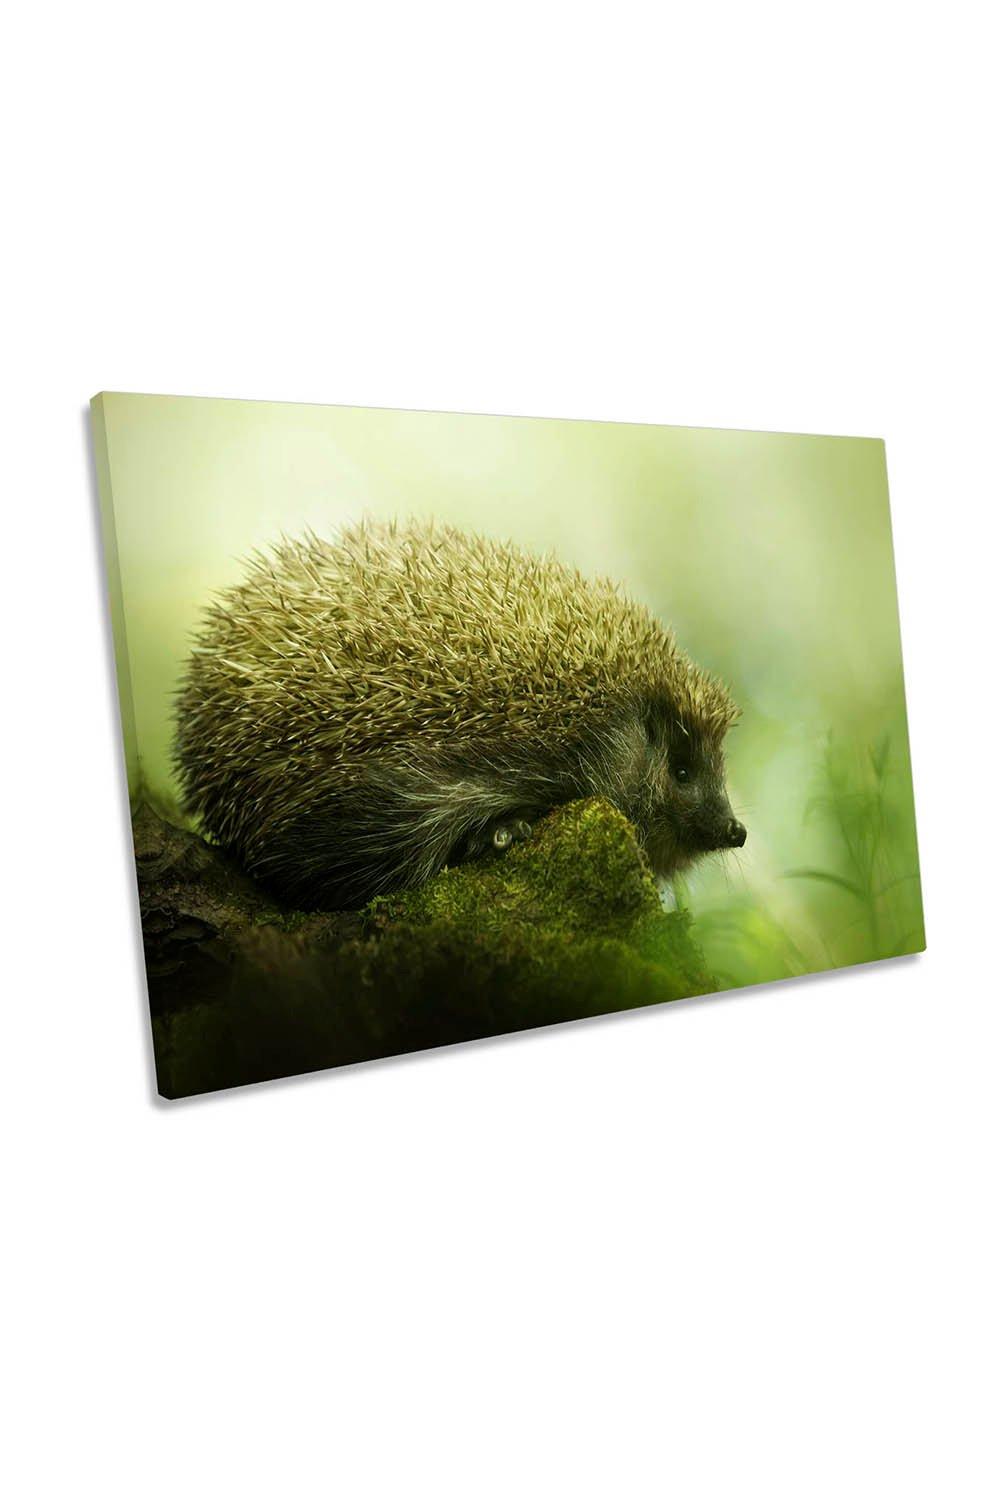 Hedgehog Misty Green Forest Canvas Wall Art Picture Print